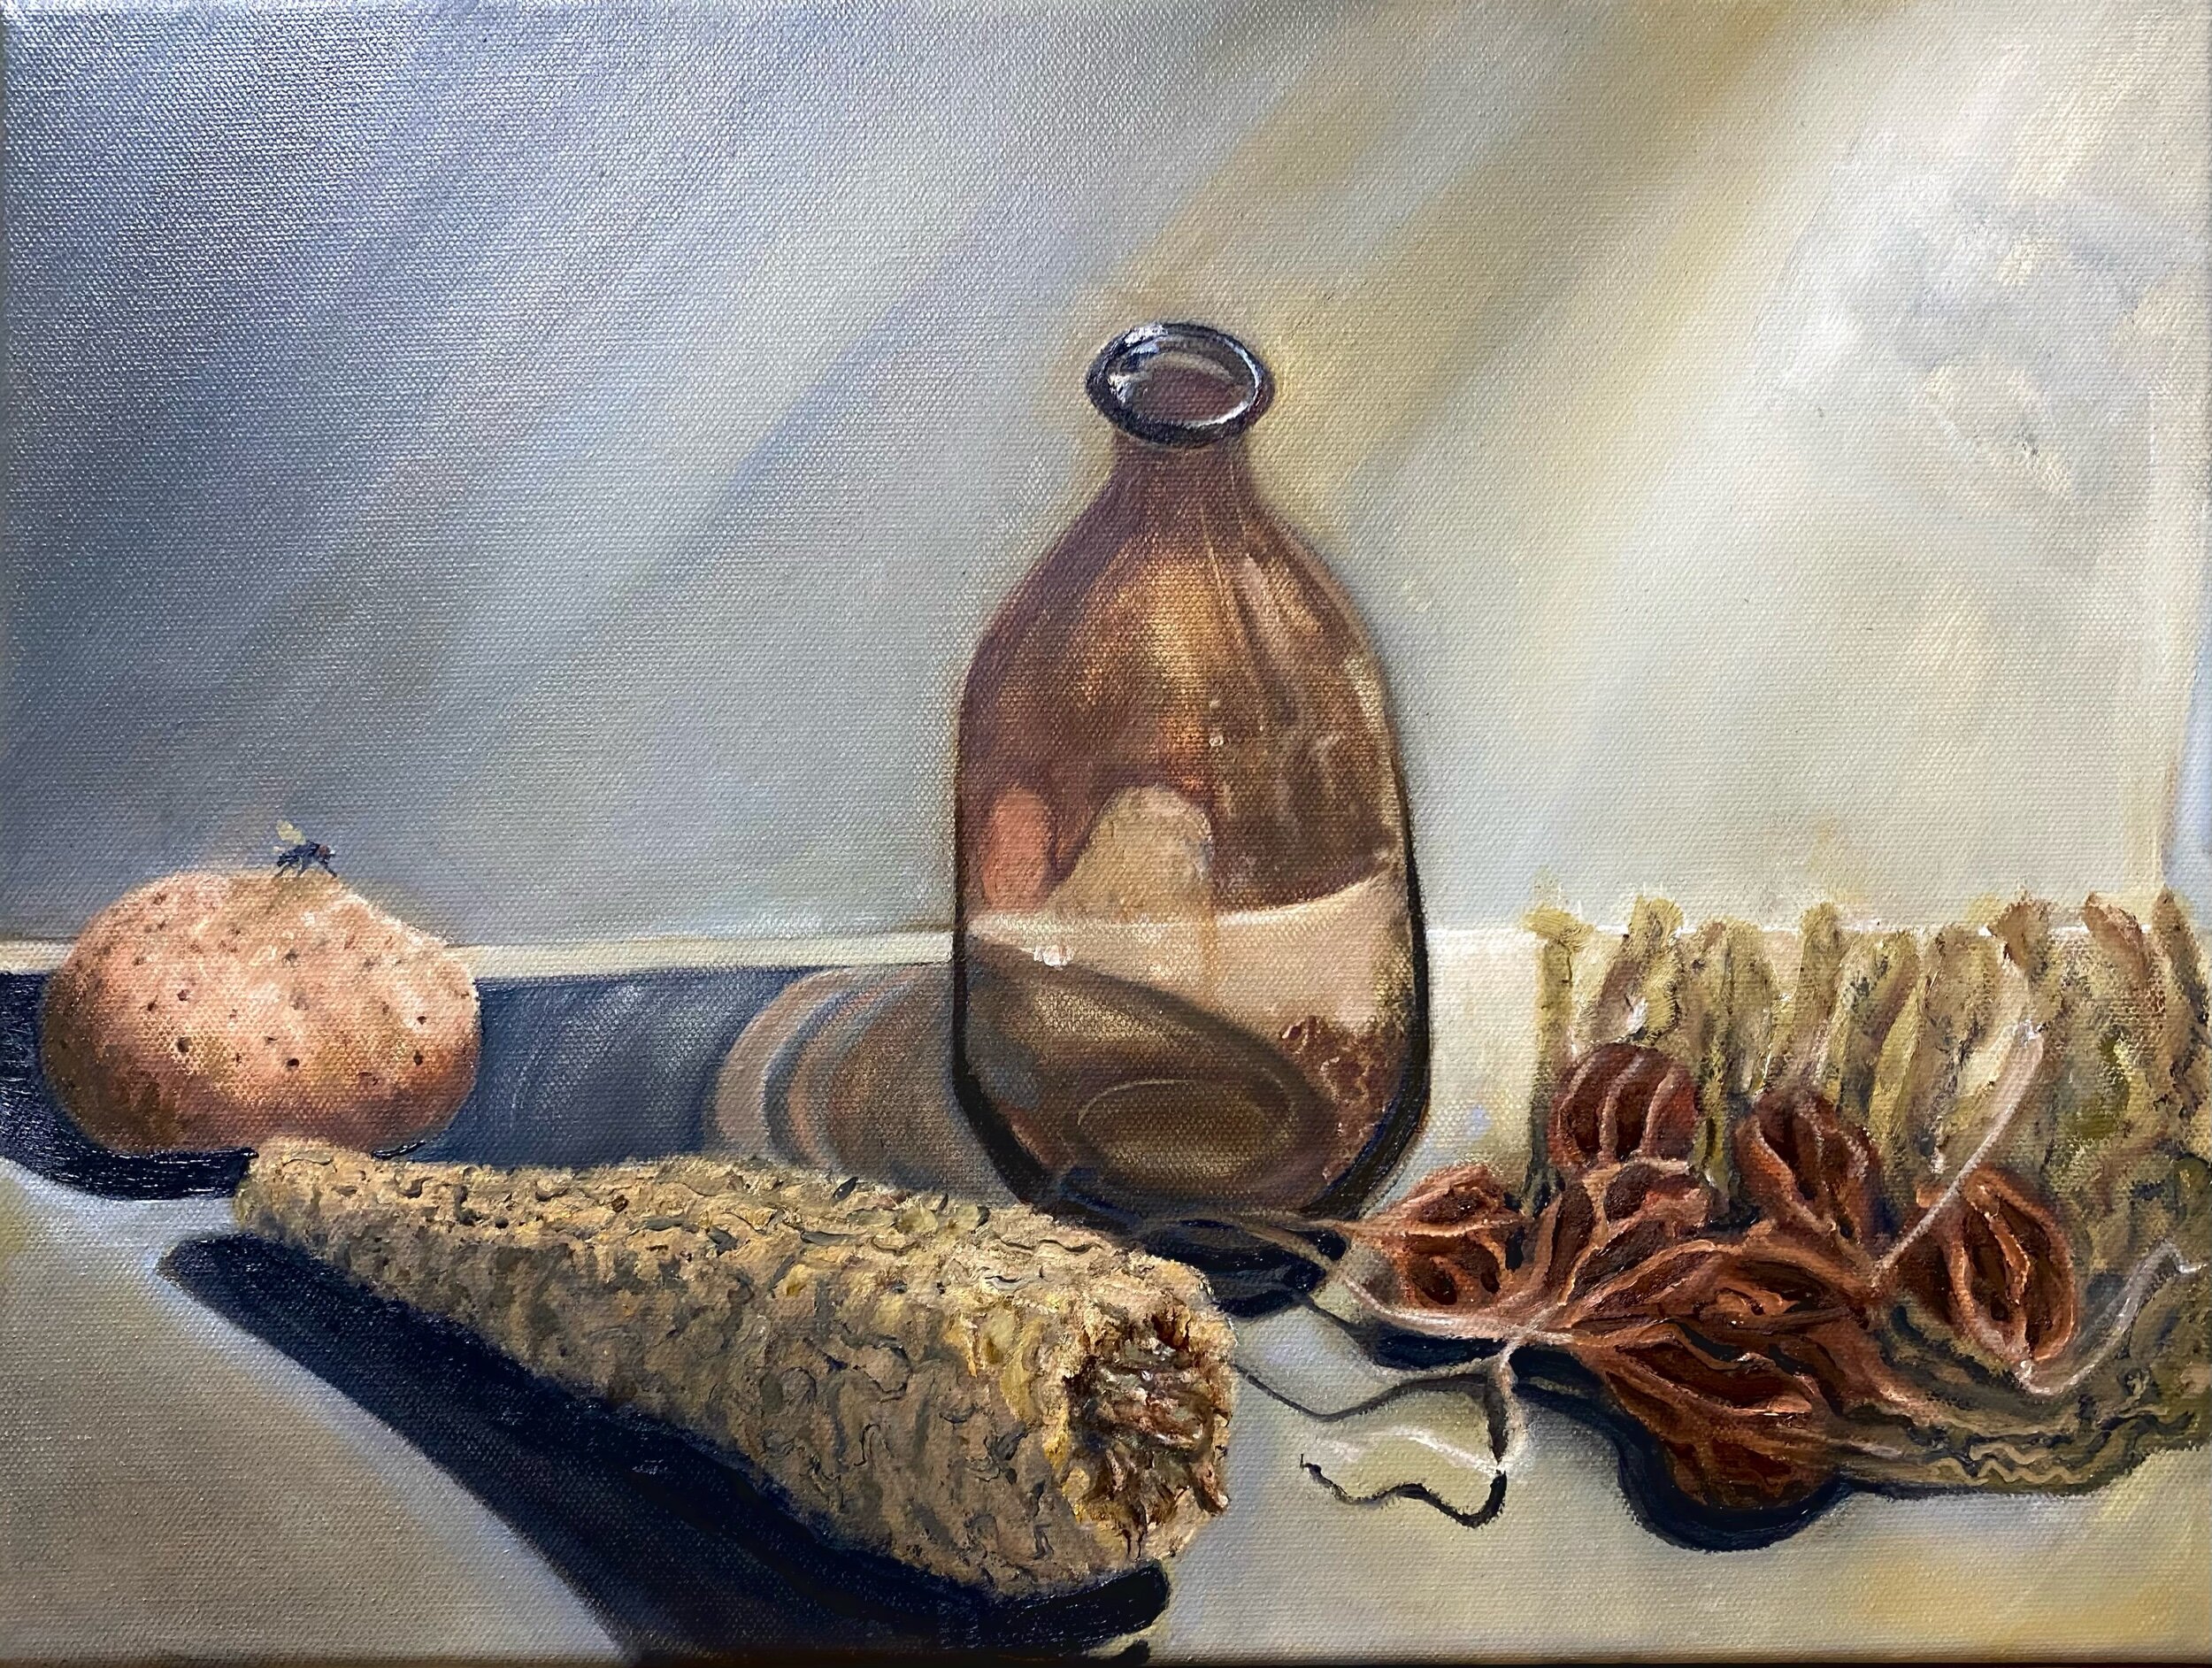 Rotting Root Vegetables and a Bottle